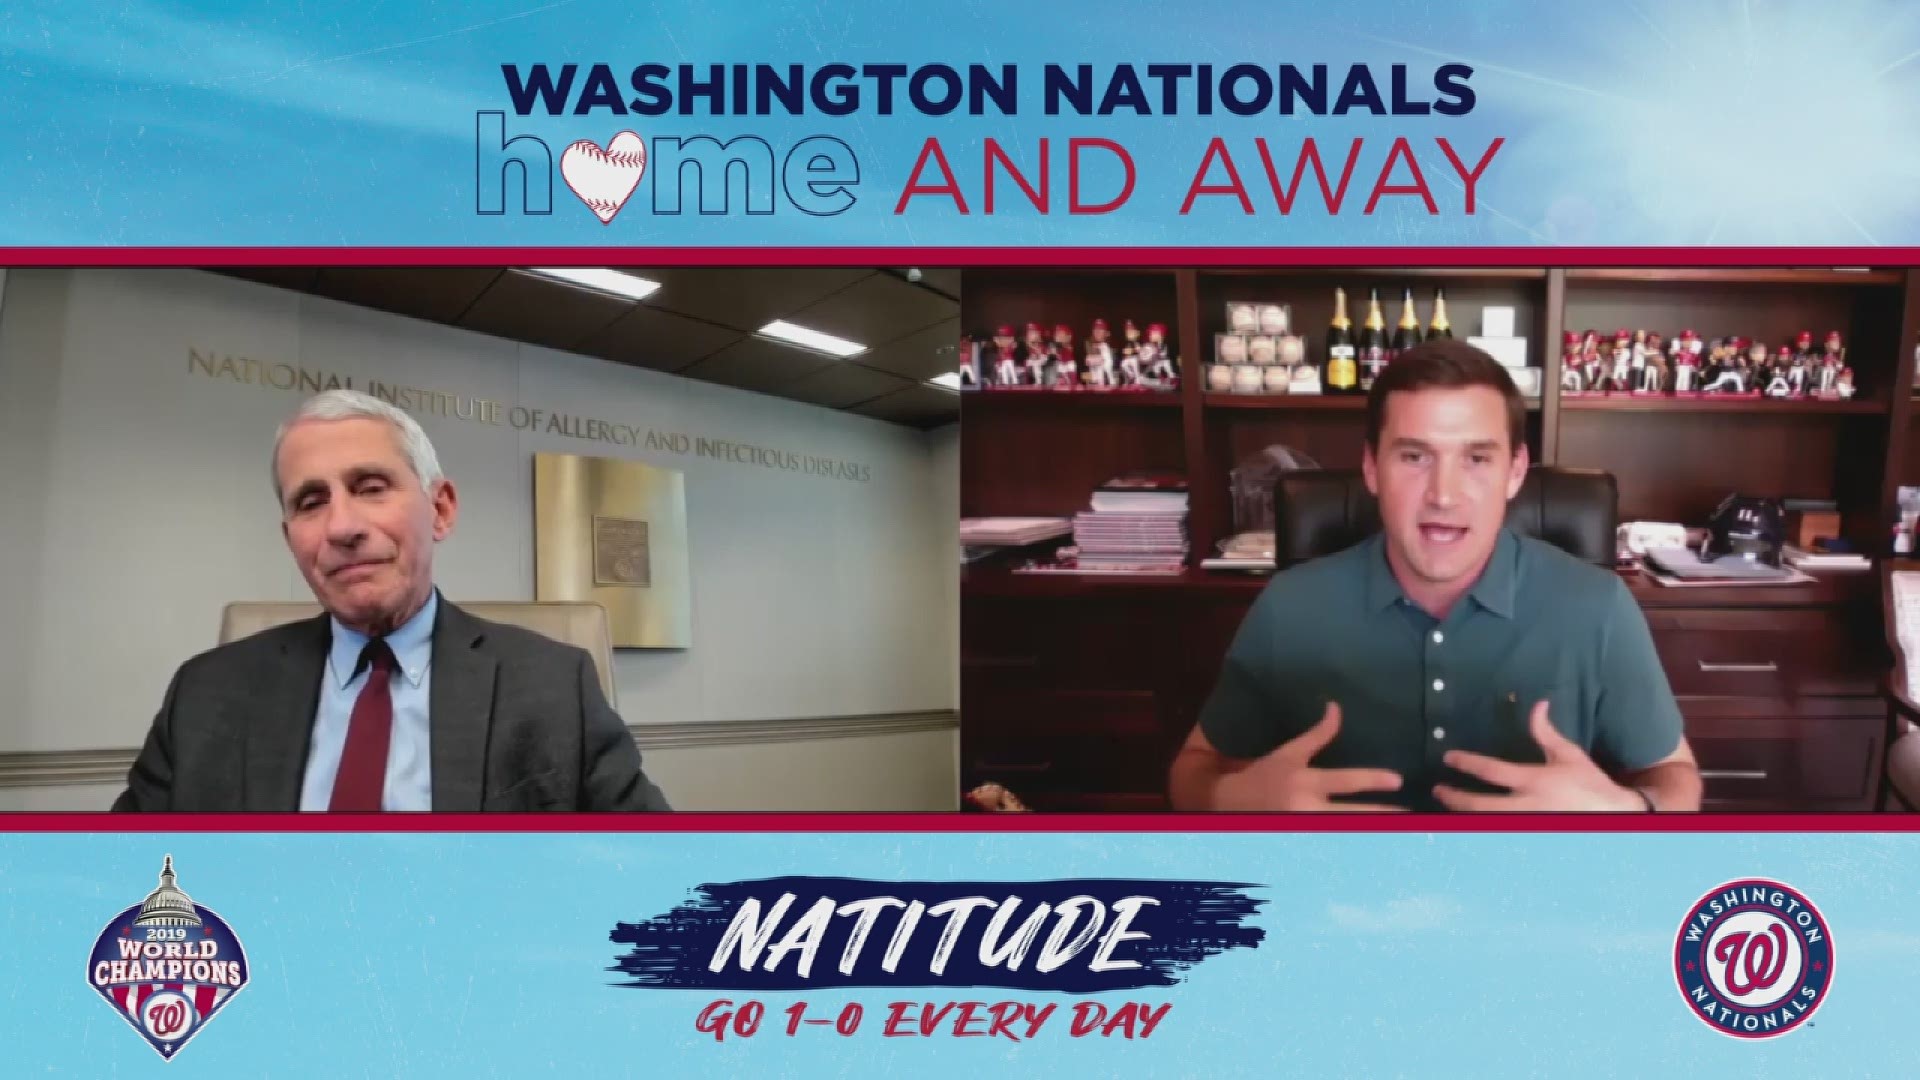 Mr. National sat down and interviewed the National Institute of Health Dr. Fauci during a live stream Wednesday.